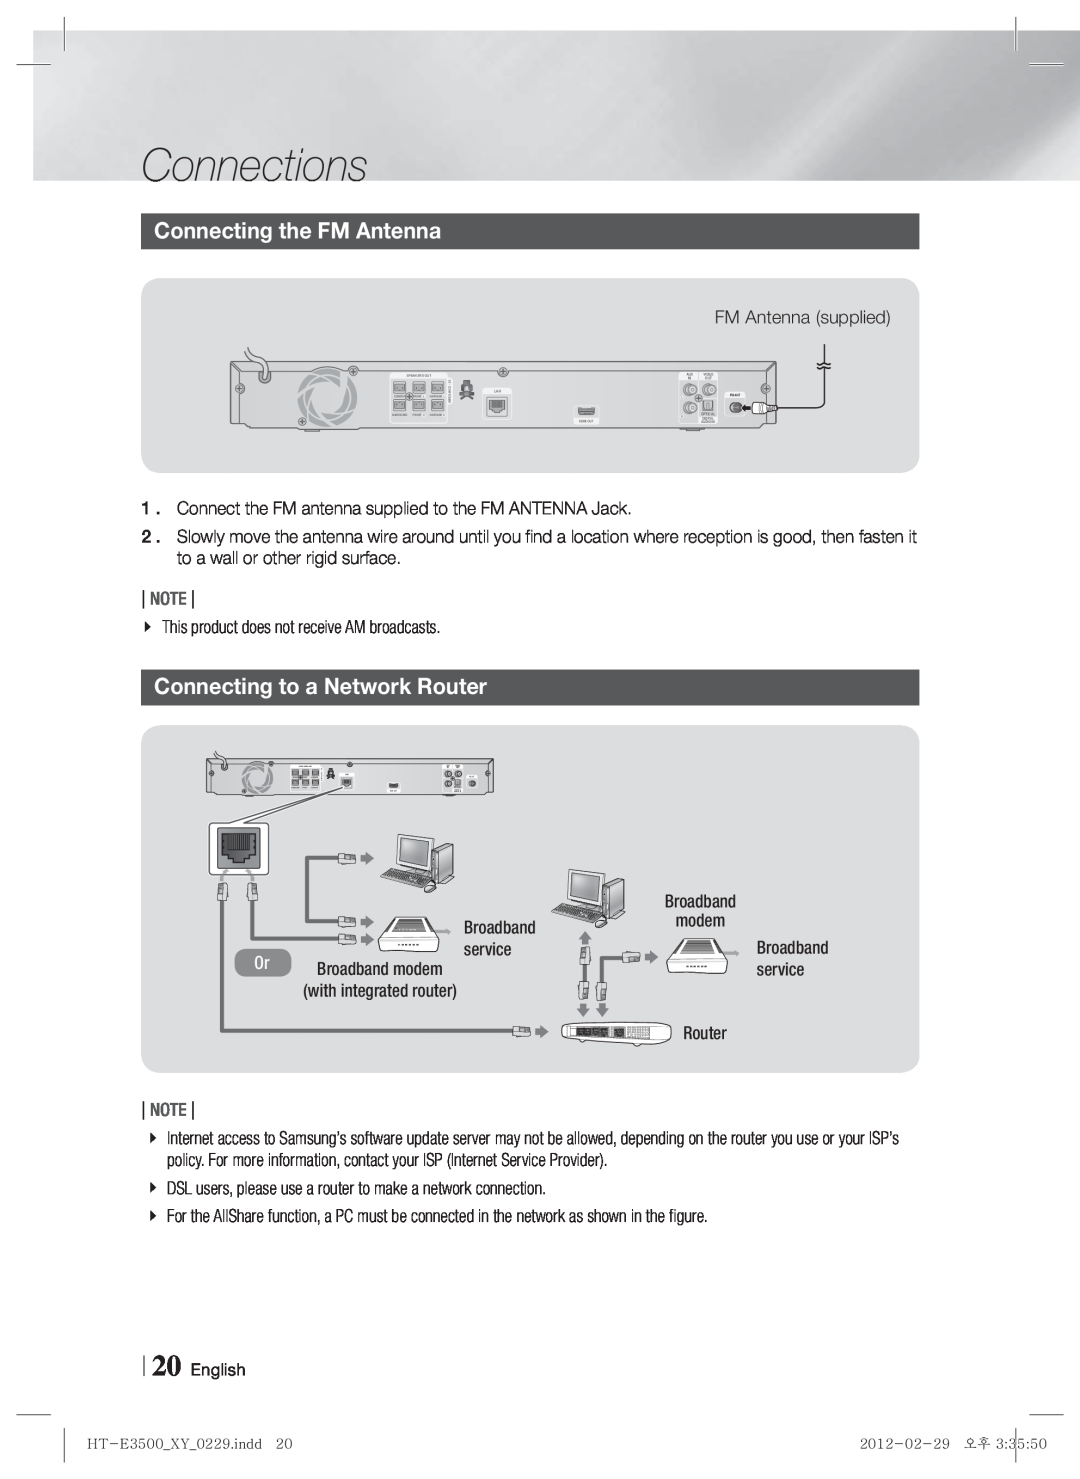 Samsung HT-E3530, E3500, HT-E3550 user manual Connecting the FM Antenna, Connecting to a Network Router, Connections 